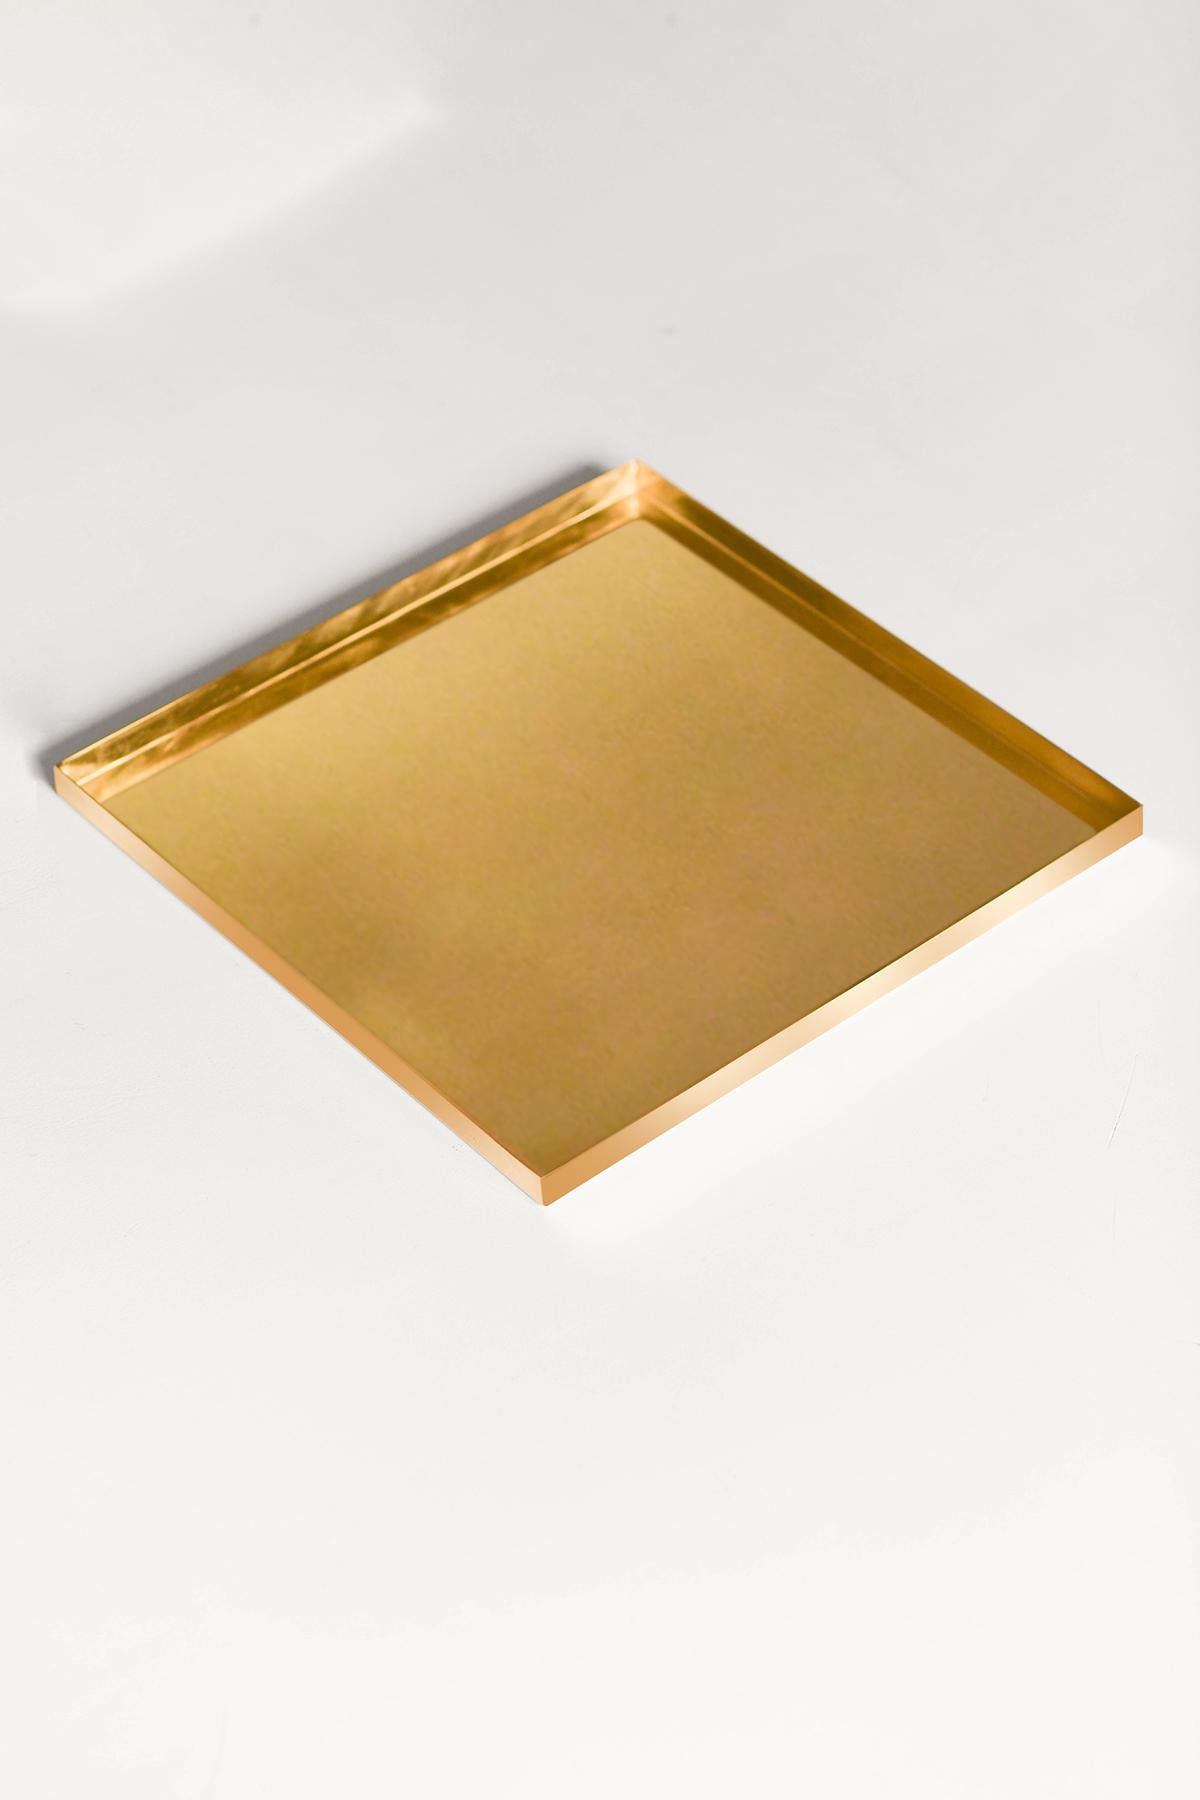 Brass trays “Molto” Editions
Italian Artisanal Production
Dimensions: 40W x 40D x 2 H cm.
This tray is also available in other sizes:
26x26cm  30x30cm  35x35cm 
Contact us for more information about size customizations